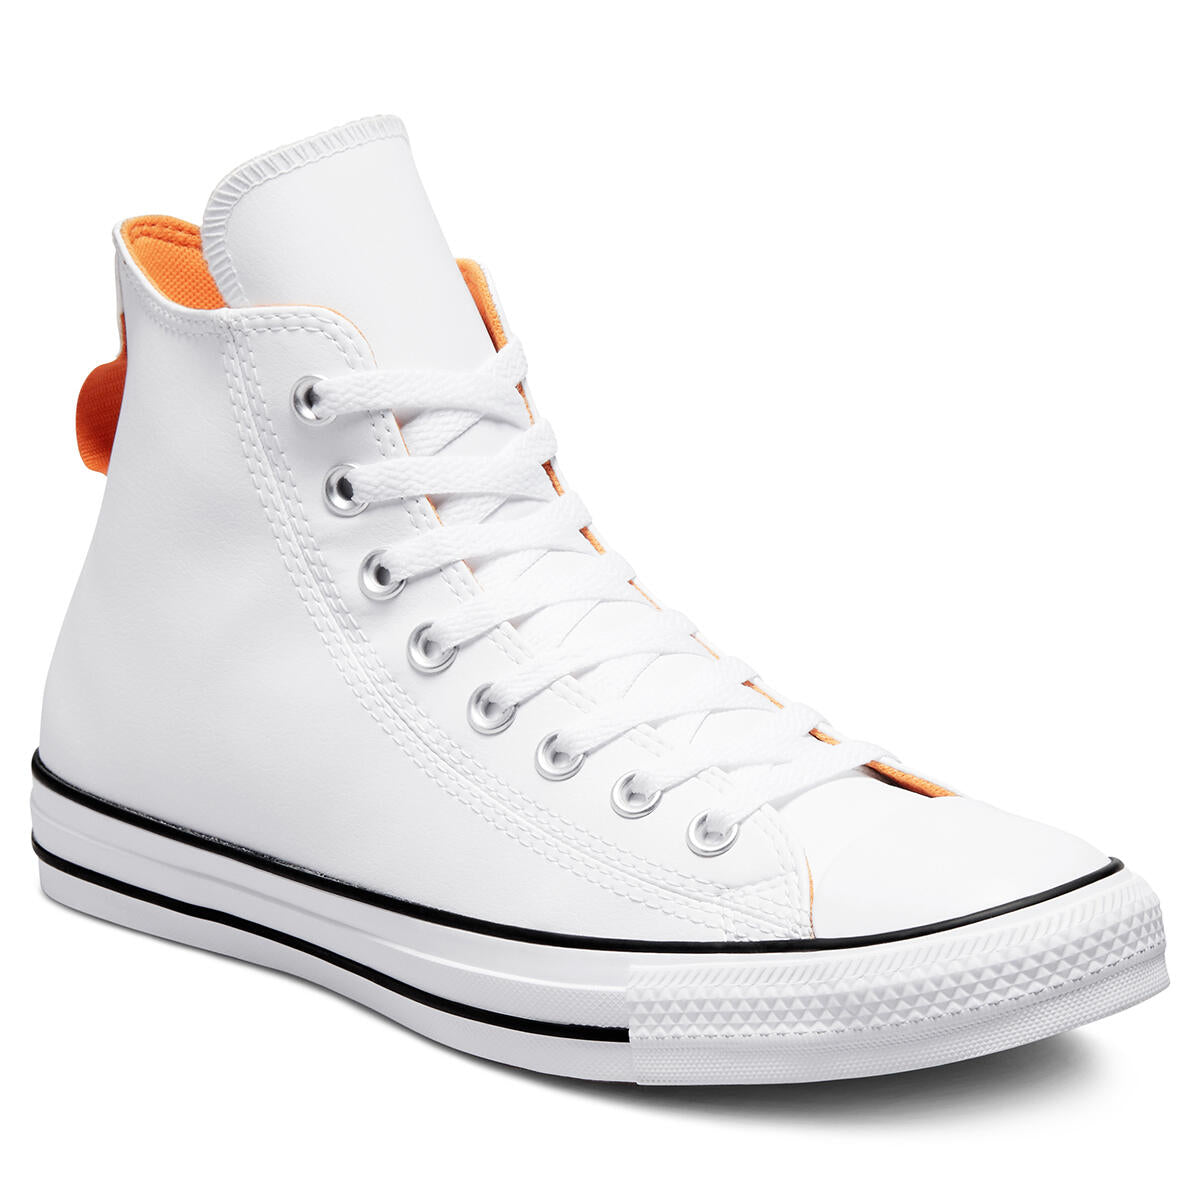 Fuera combinación embrague Converse Chuck Taylor Crafted Faux Leather Hi White/Light Curry/Whit – Shoe  Bizz